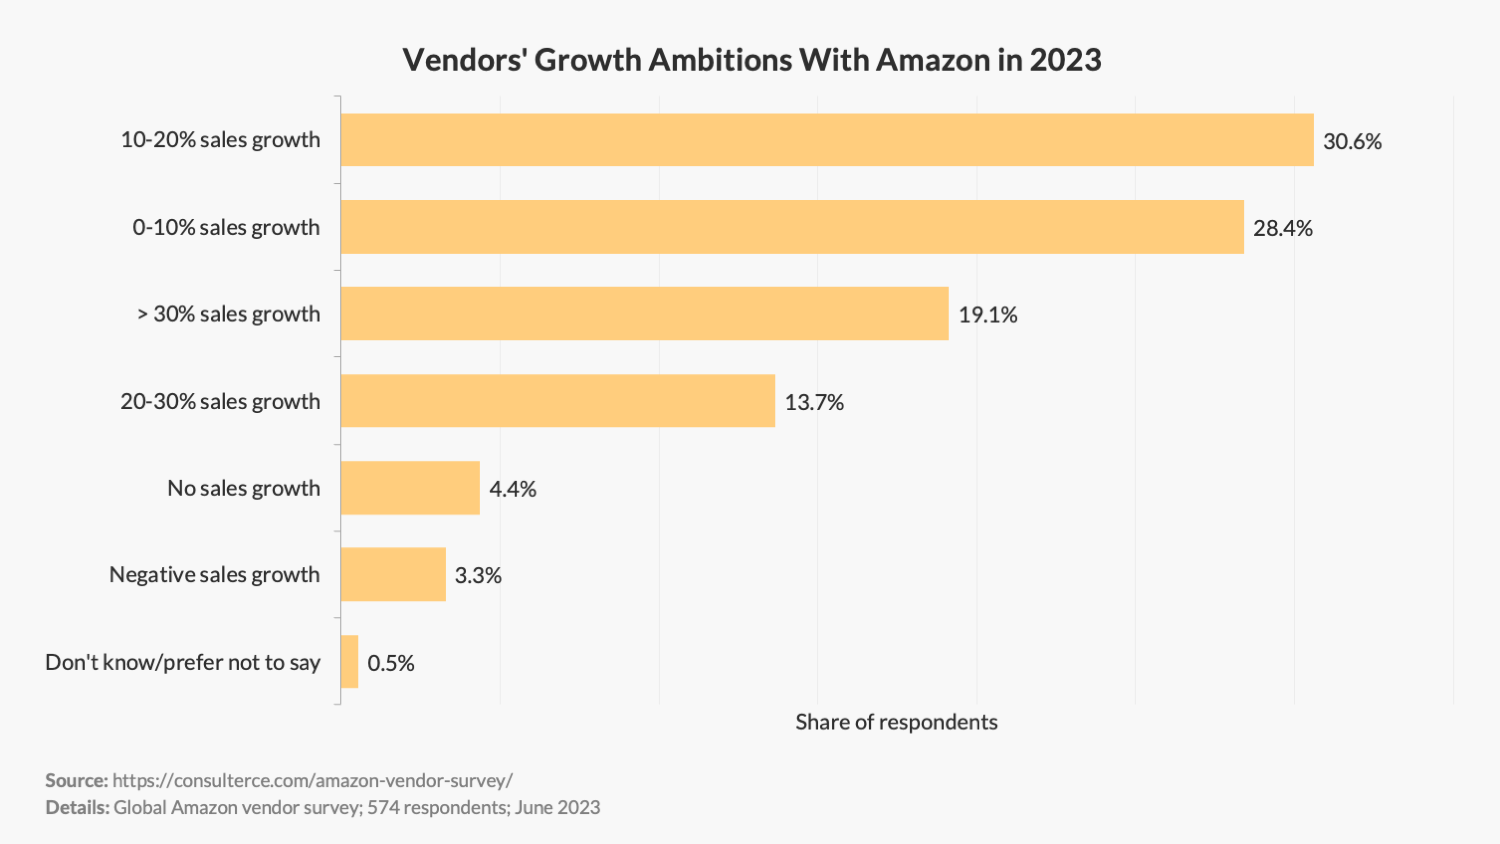 Growth ambitions with Amazon among 1P vendors